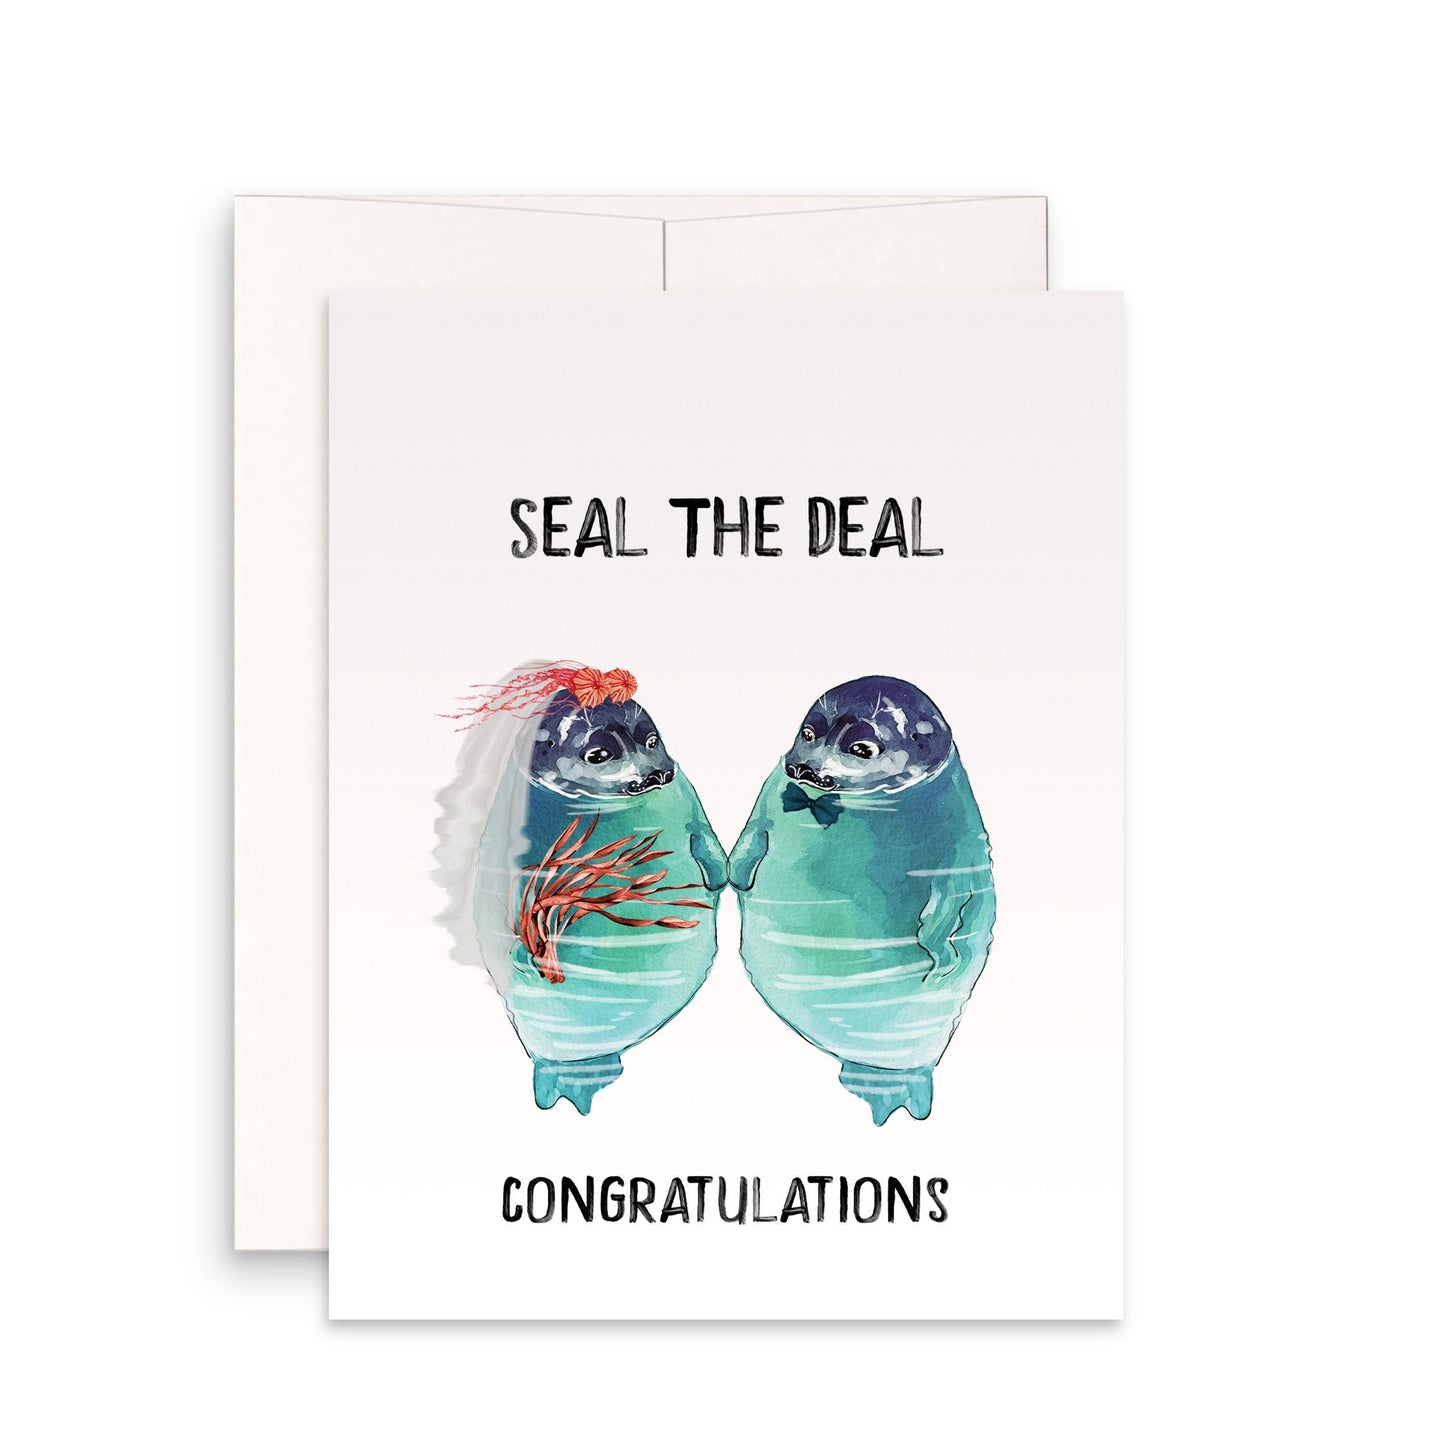 Best Friend Wedding Cards Funny - Seal The Deal Congratulations Card For Bridal Shower